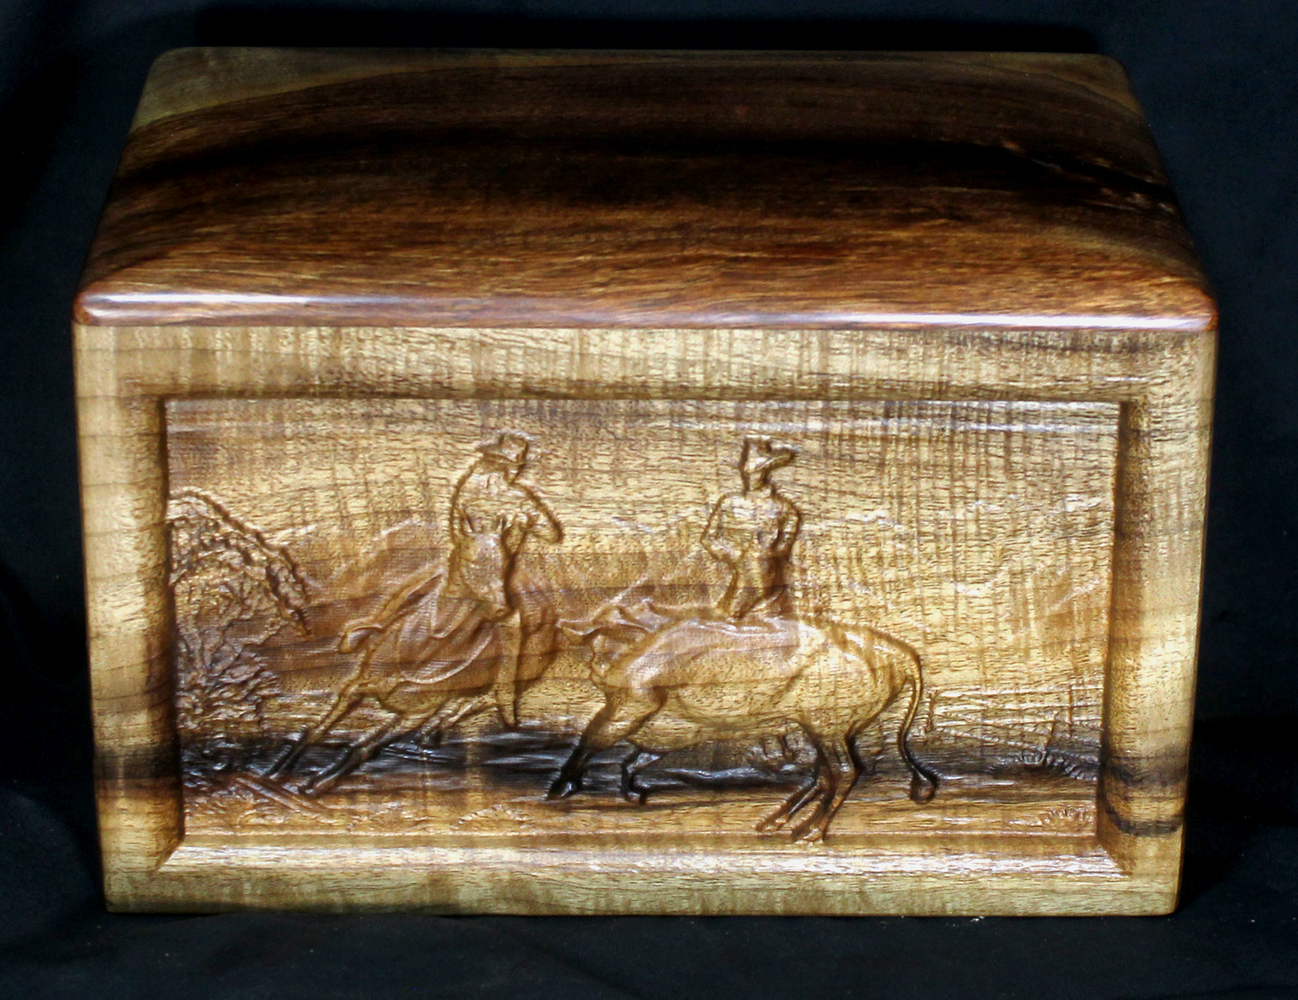 Myrtle Handmade Urn with Cowboys and Cattle